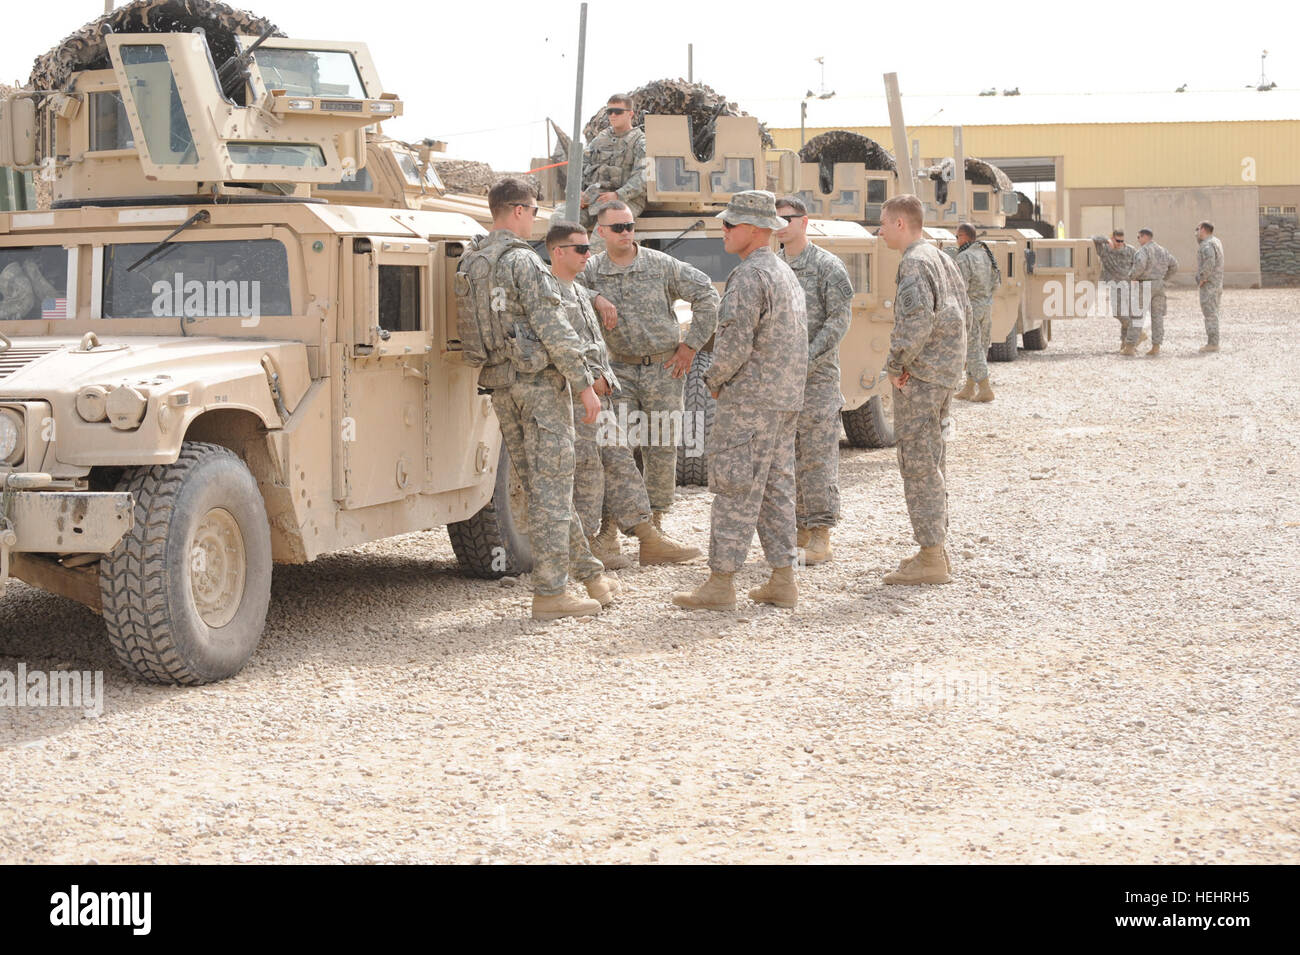 U.S. Soldiers of Bravo Company, 2nd Battalion, 505th Parachute Infantry Regiment, 3rd Brigade Combat Team, 82nd Airborne Division, wait near their vehicles at Joint Security Station Suj, in eastern Baghdad, Iraq, on March 8. The Soldiers are waiting to depart on a joint operation with Iraqi national police to distribute supplies to local schools. Soldiers, Iraqi national policemen distribute school supplies in Baghdad 157183 Stock Photo